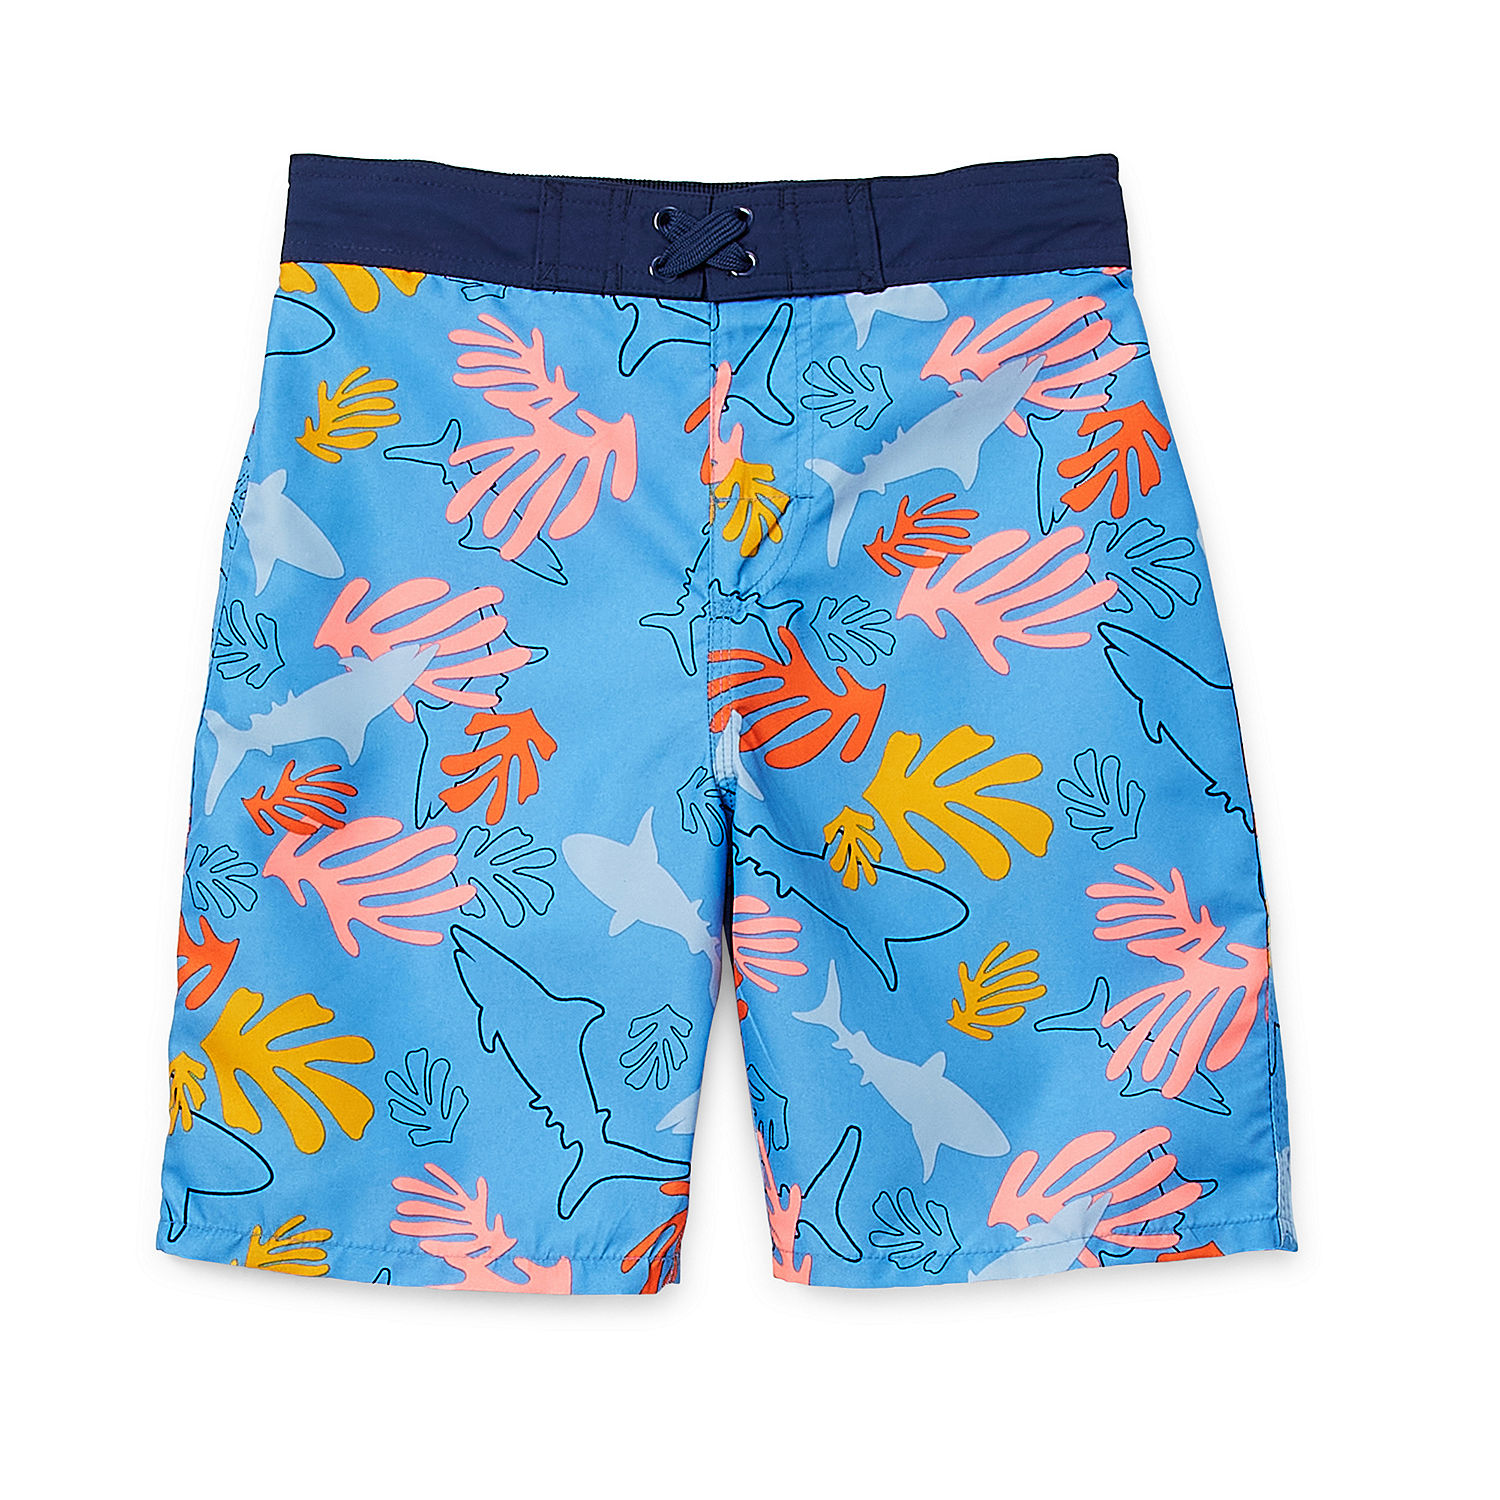 Thereabouts With Boxer Brief Liner Little & Big Boys Board Shorts ...